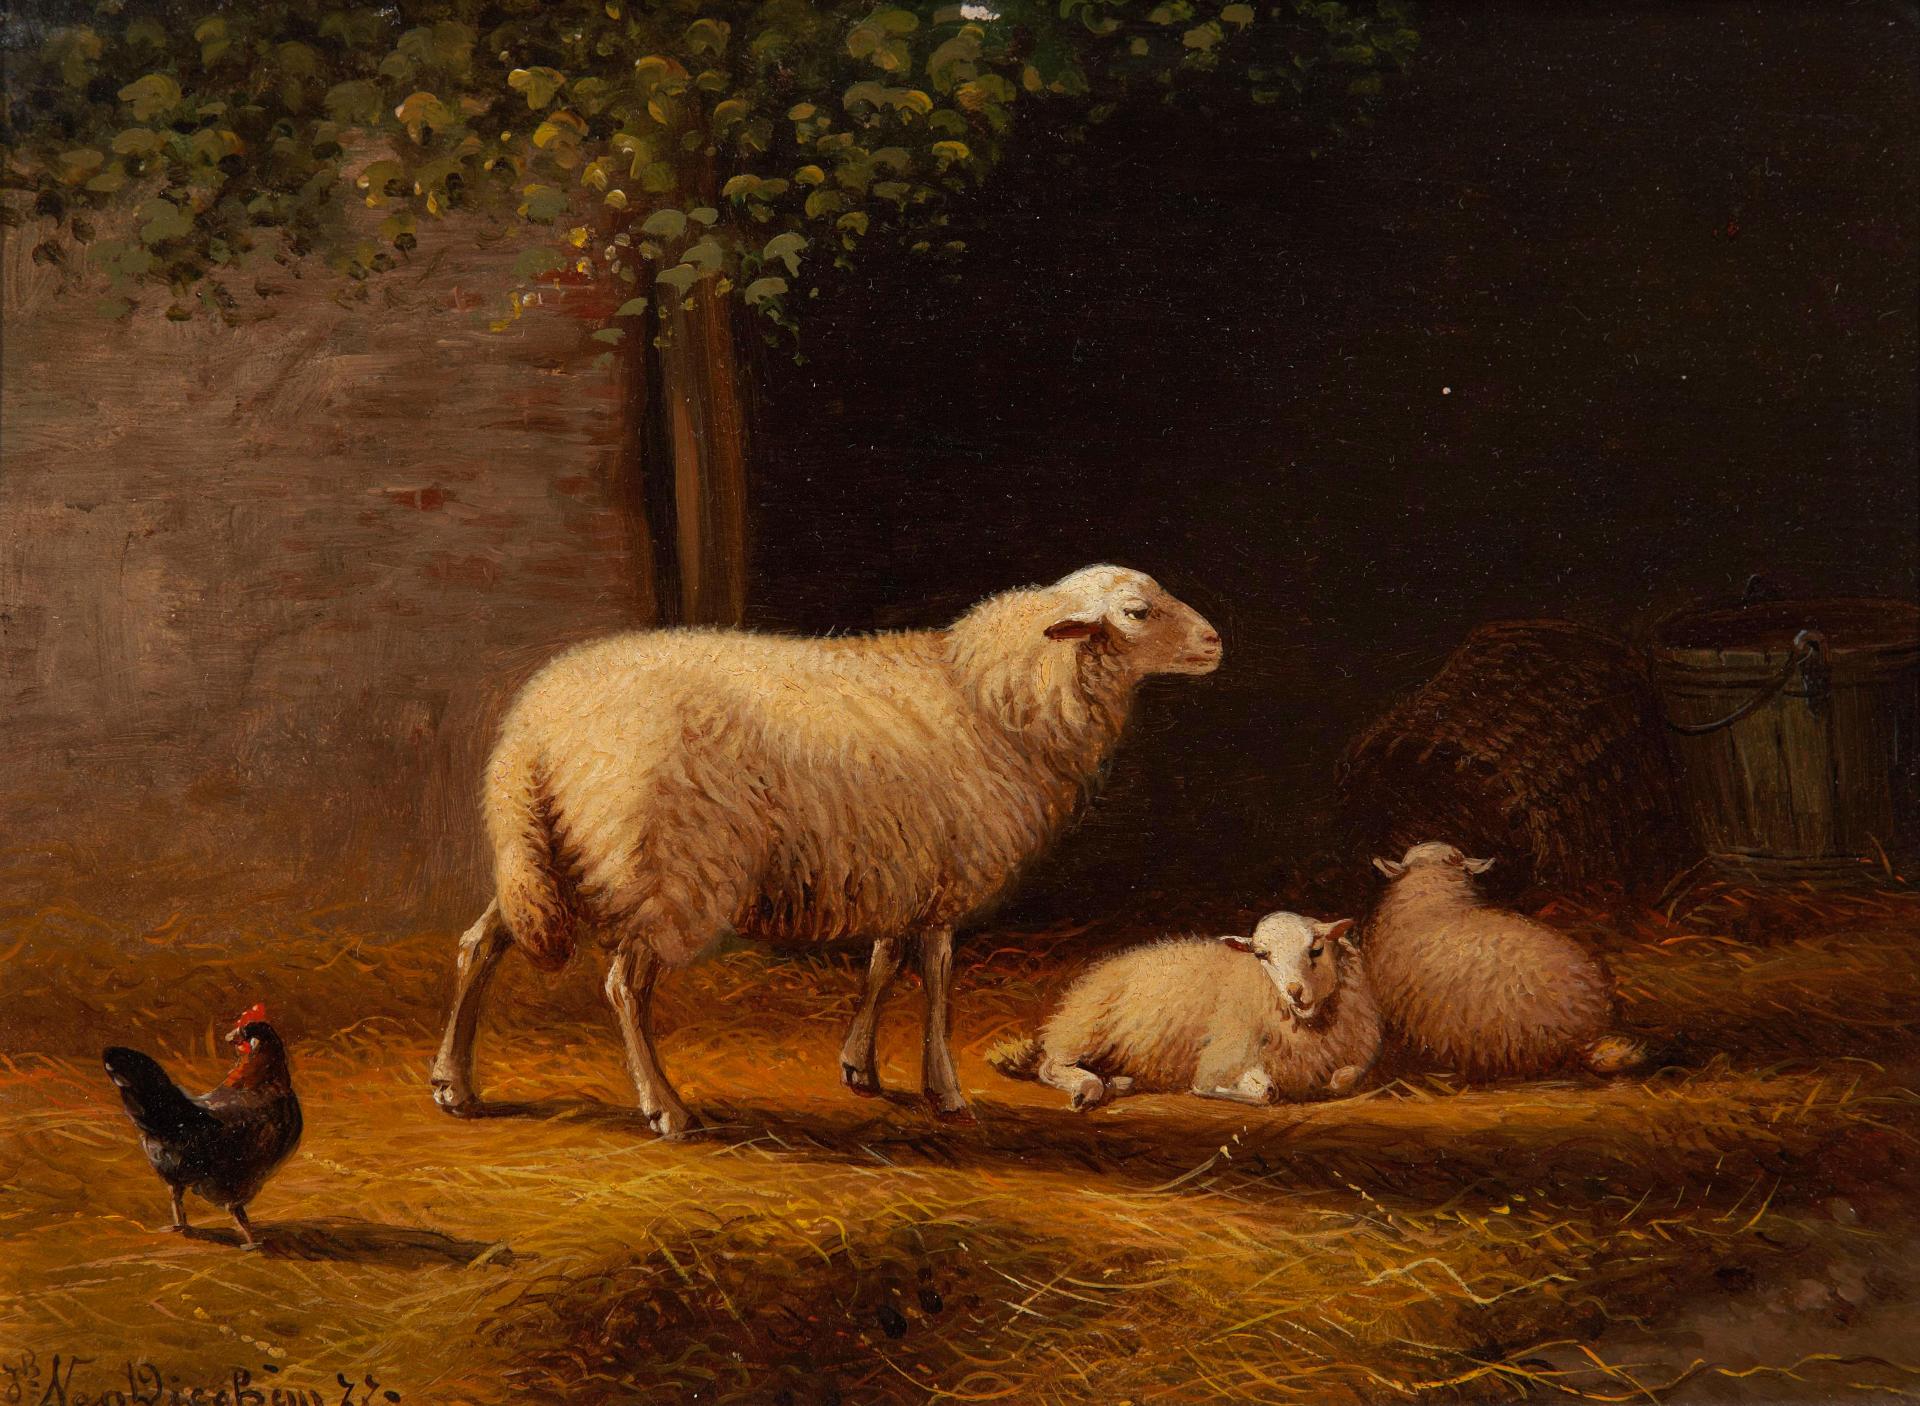 Jacob Van Dieghem - Ewe and lambs outside a barn; Sheep and a goat in a landscape, a pair